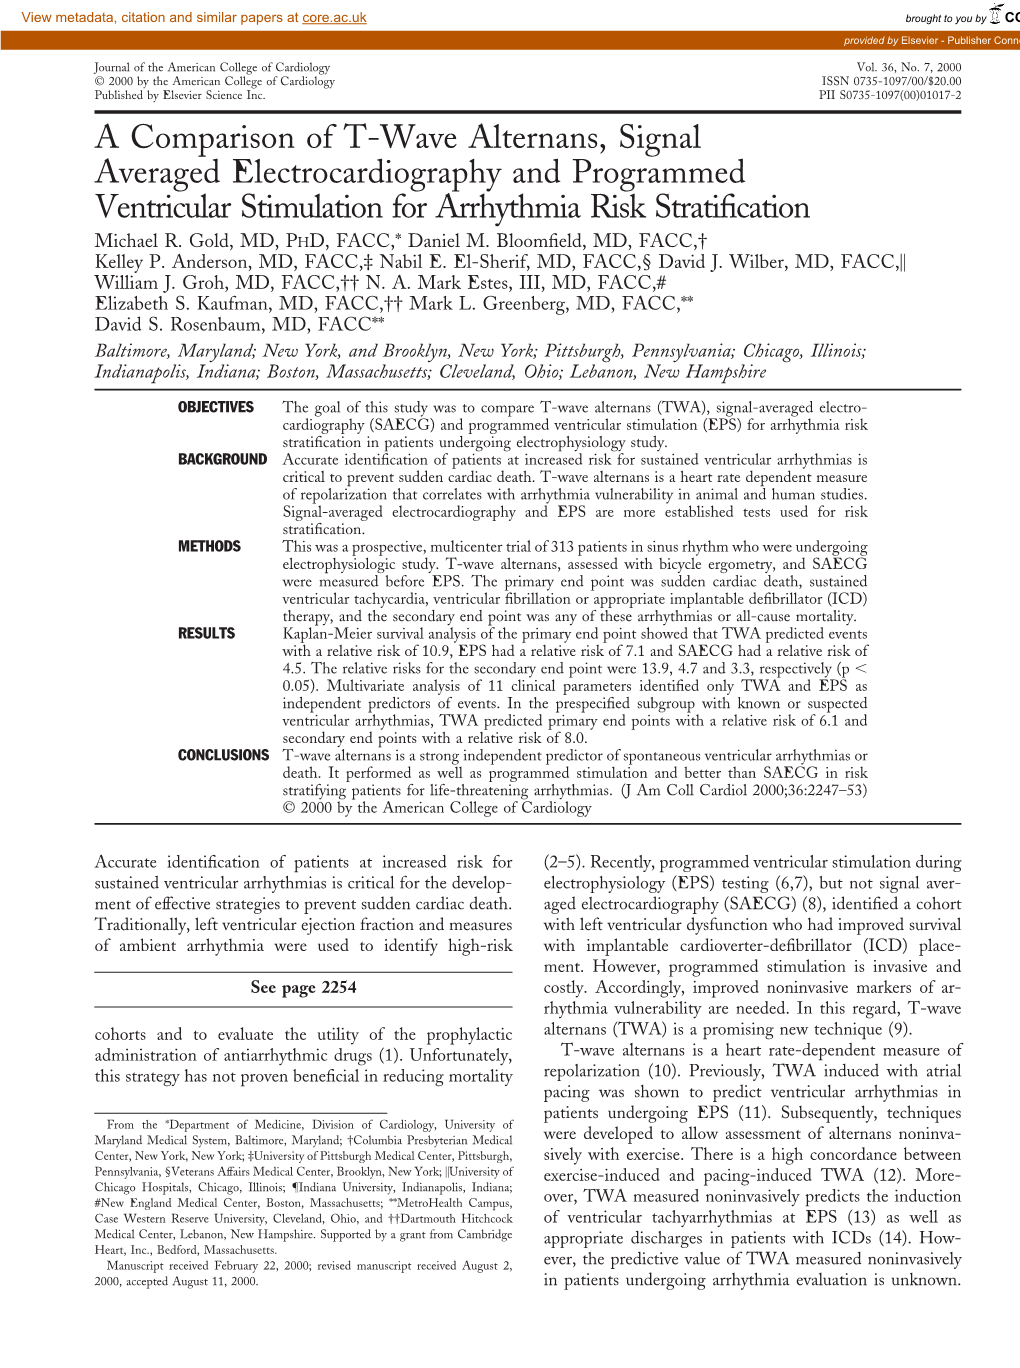 A Comparison of T-Wave Alternans, Signal Averaged Electrocardiography and Programmed Ventricular Stimulation for Arrhythmia Risk Stratiﬁcation Michael R